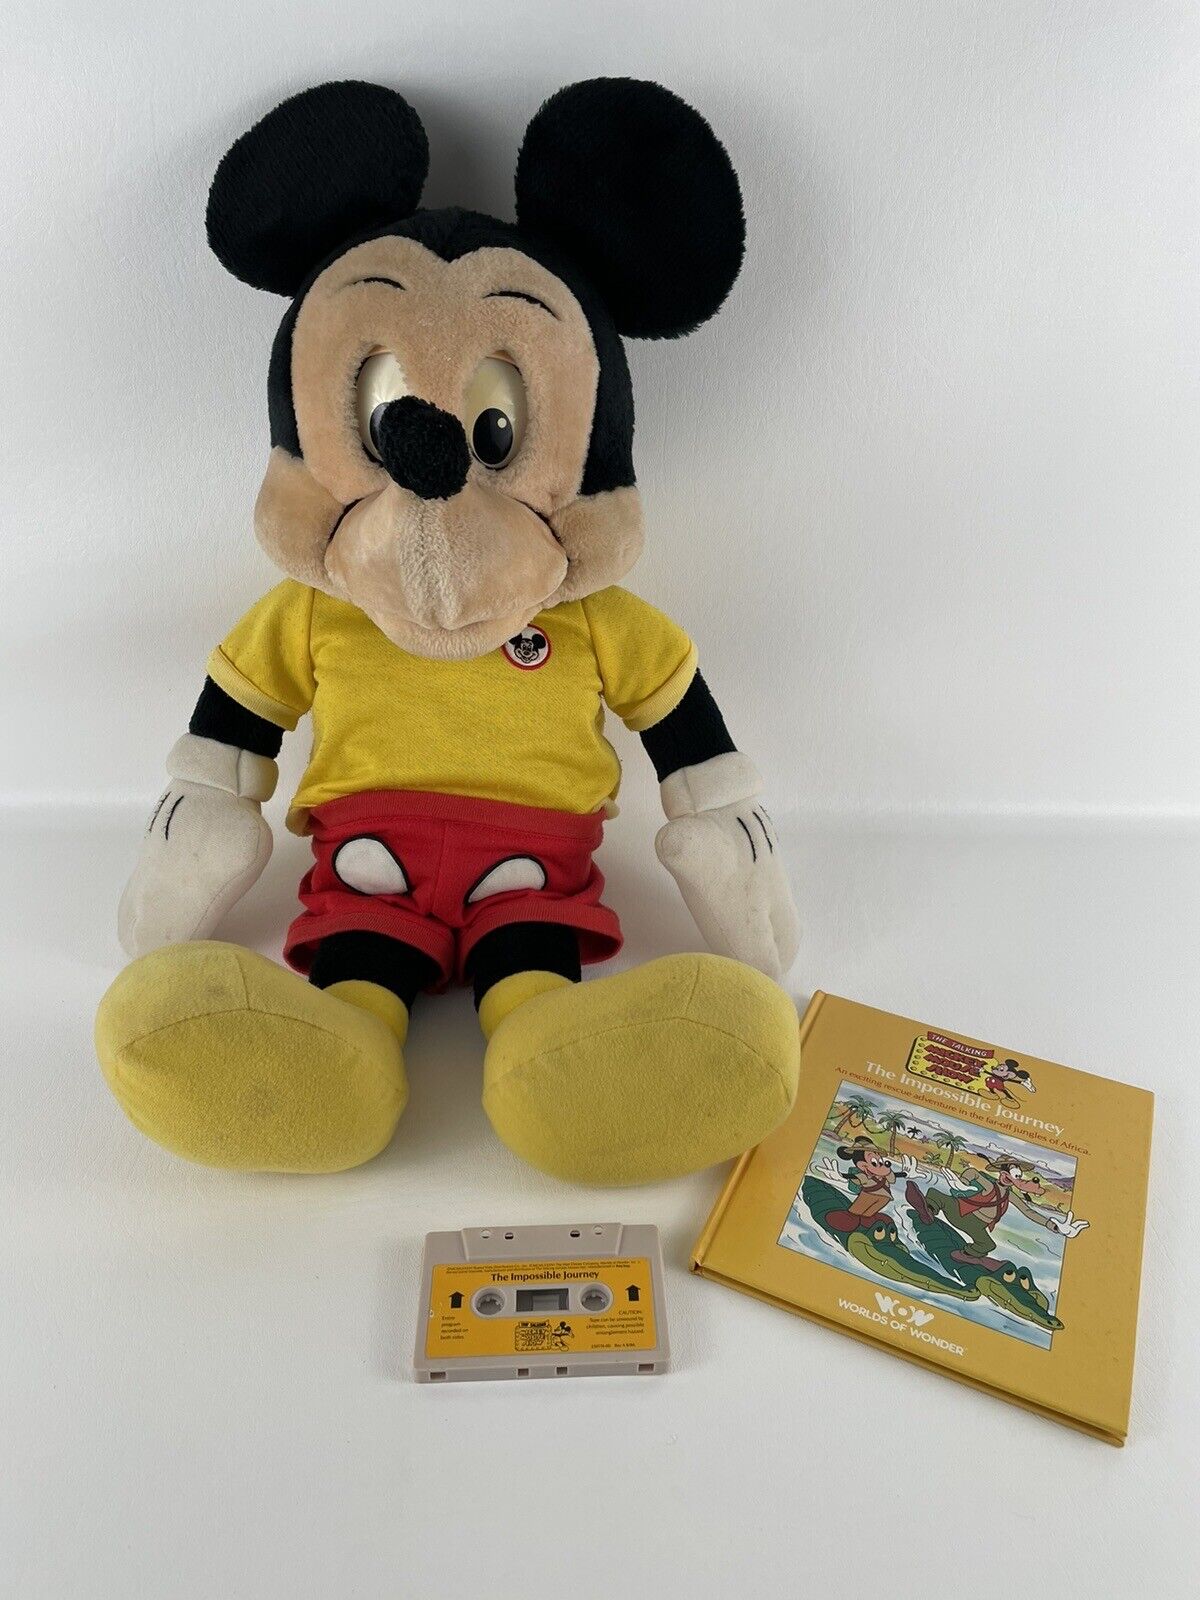 Vintage 1986 Worlds Of Wonder Talking Mickey Mouse Plush Doll with Book & Tape